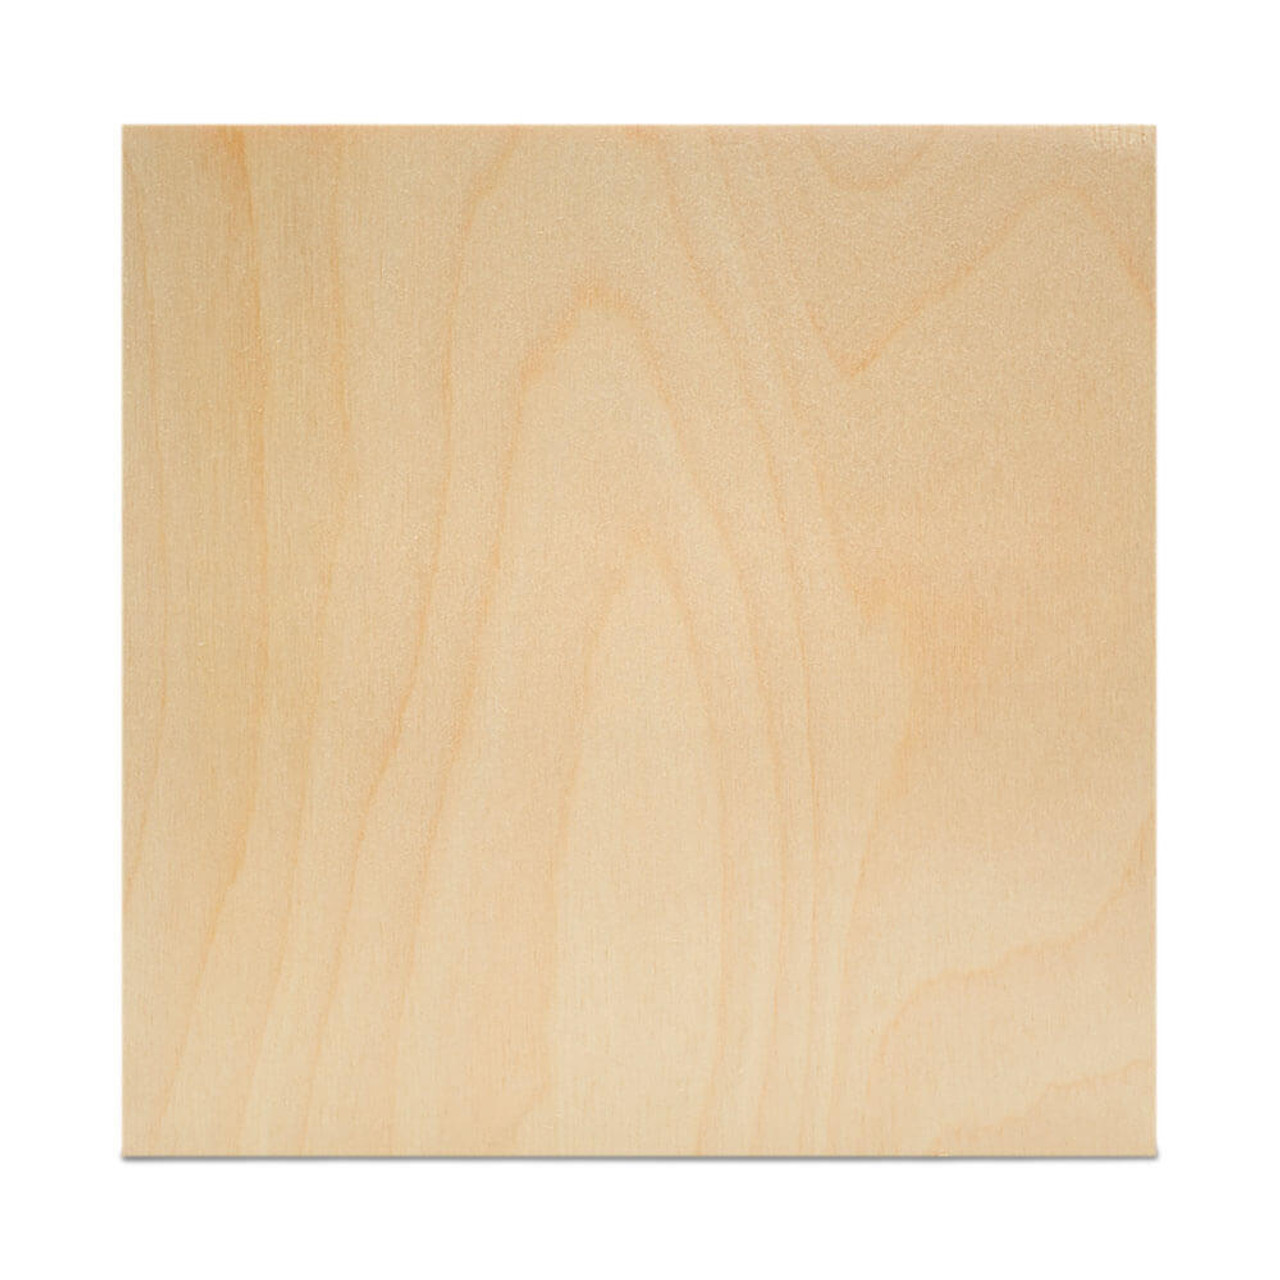 6mm, 1/4 x 8 x 8 Unfinished Baltic Birch plywood sheets